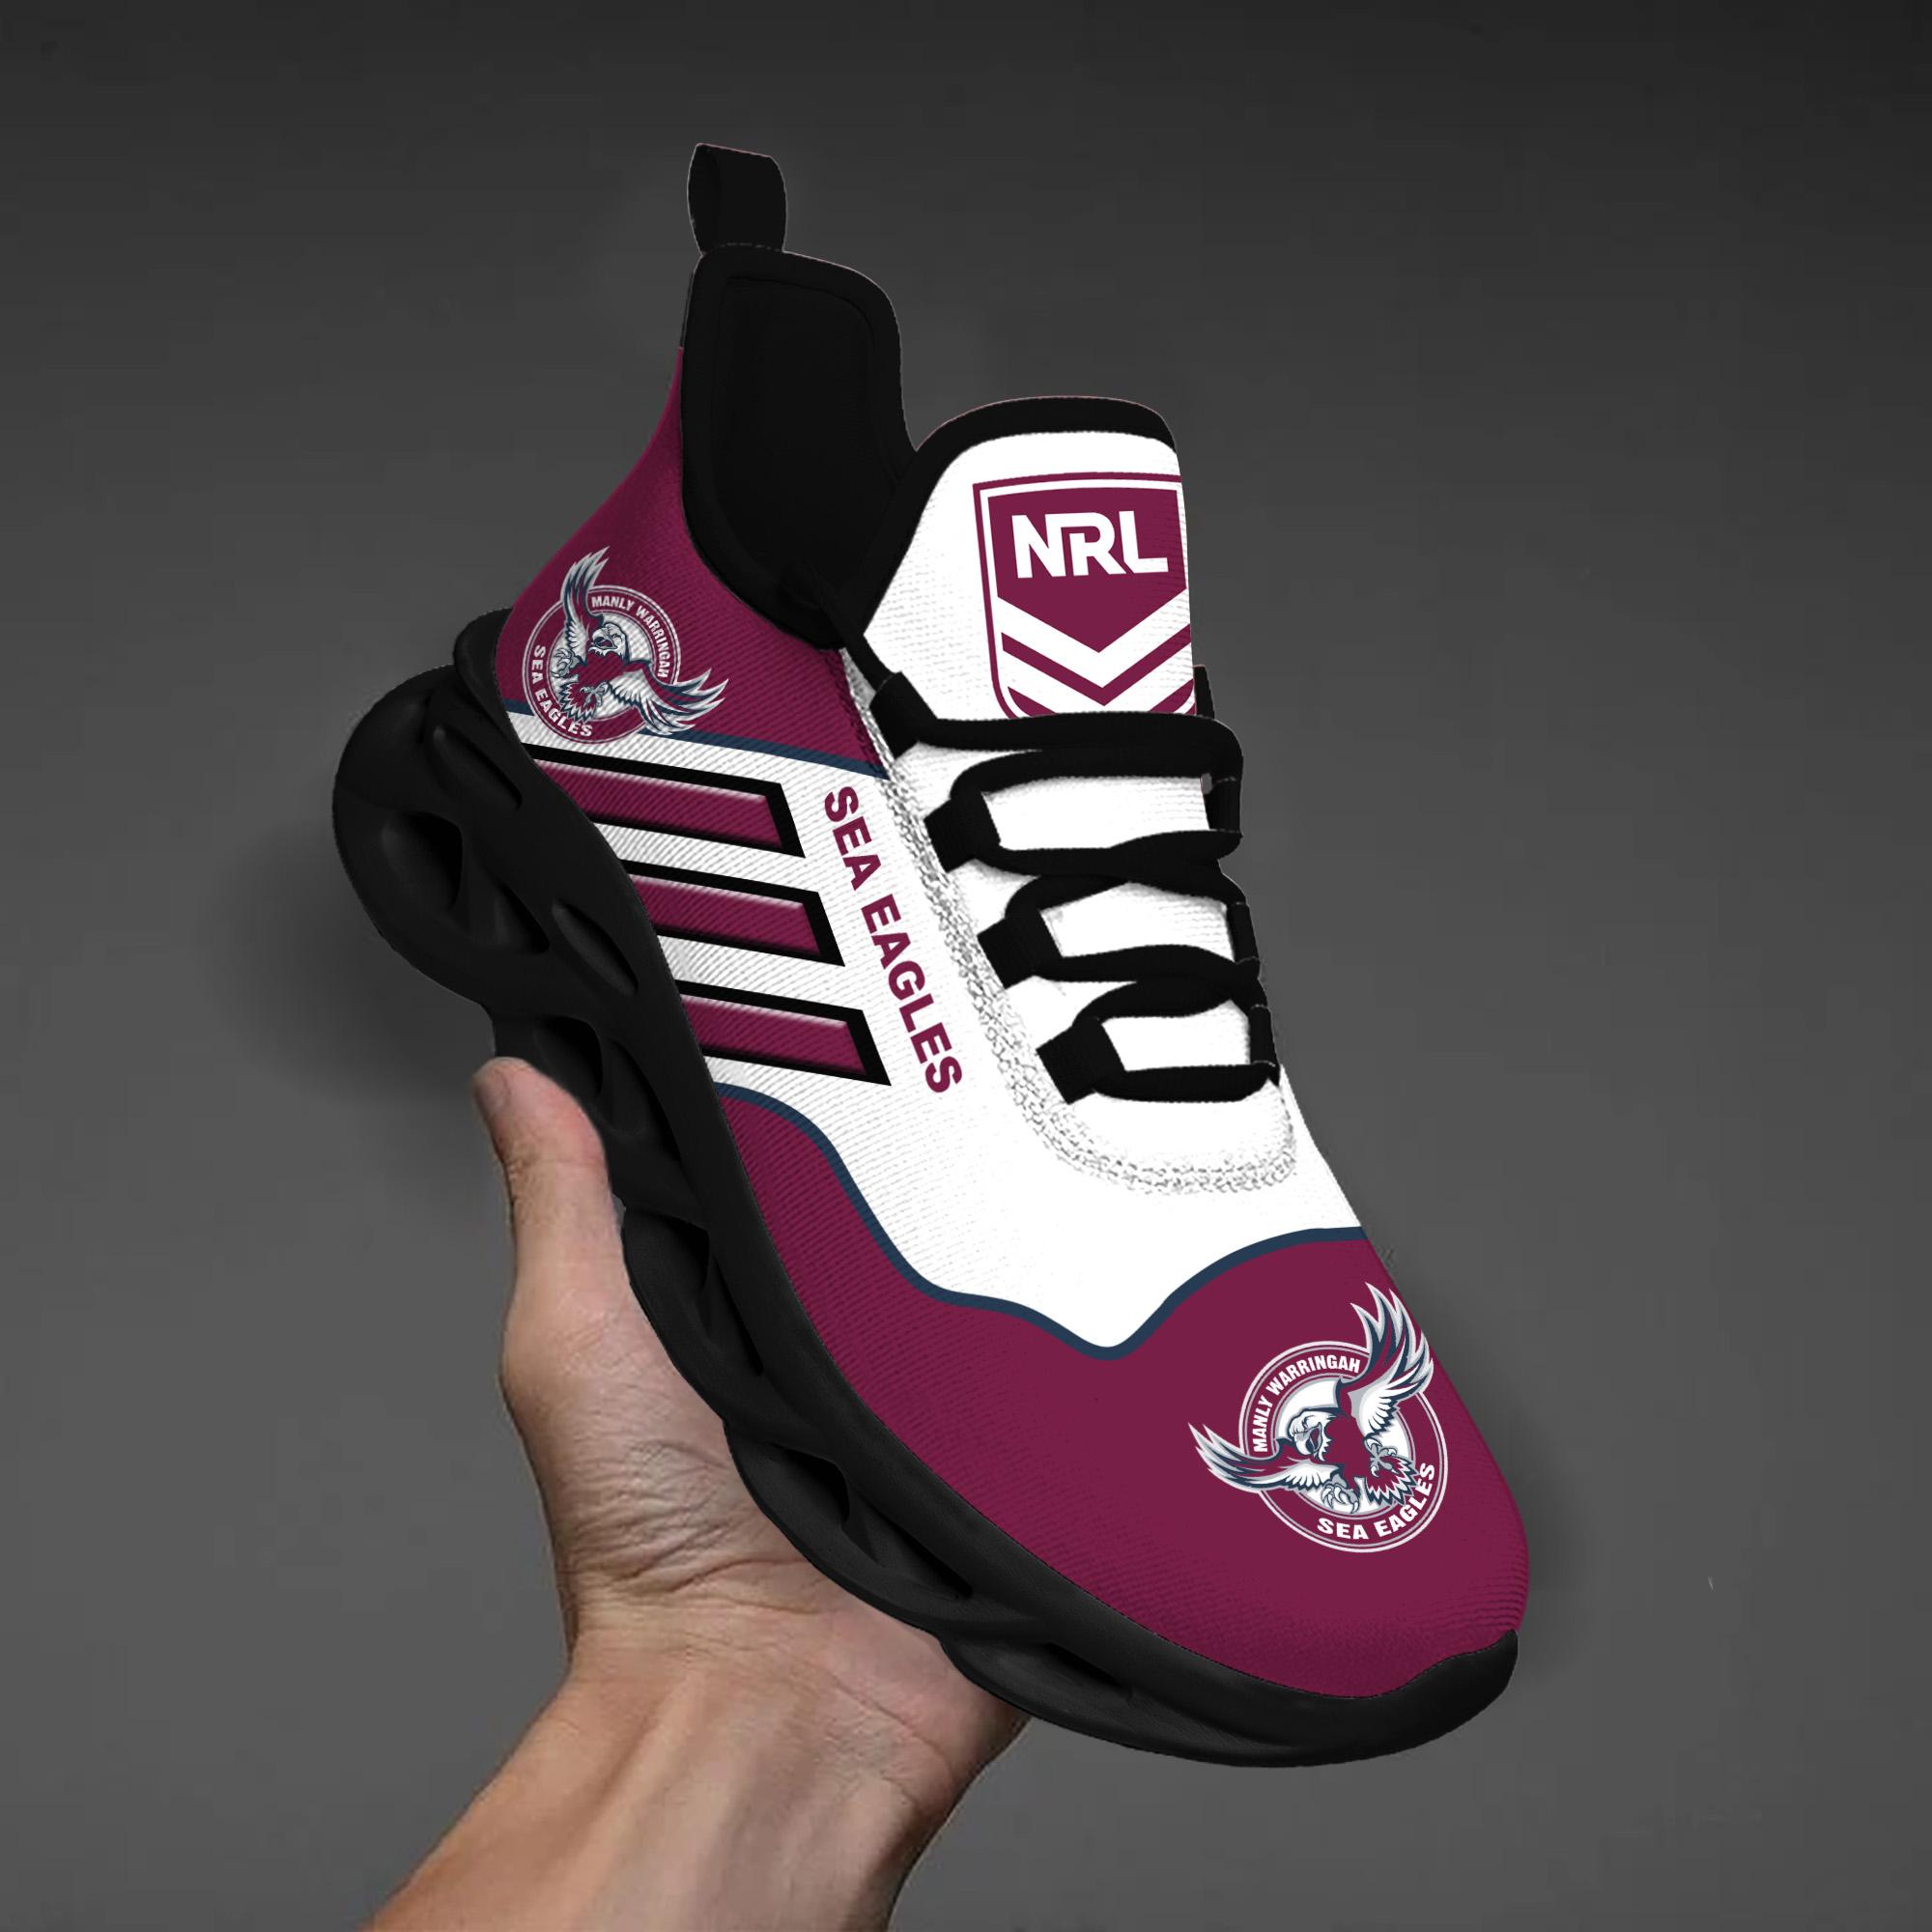 Manly Warringah Sea Eagles NRL Clunky Max Soul Shoes